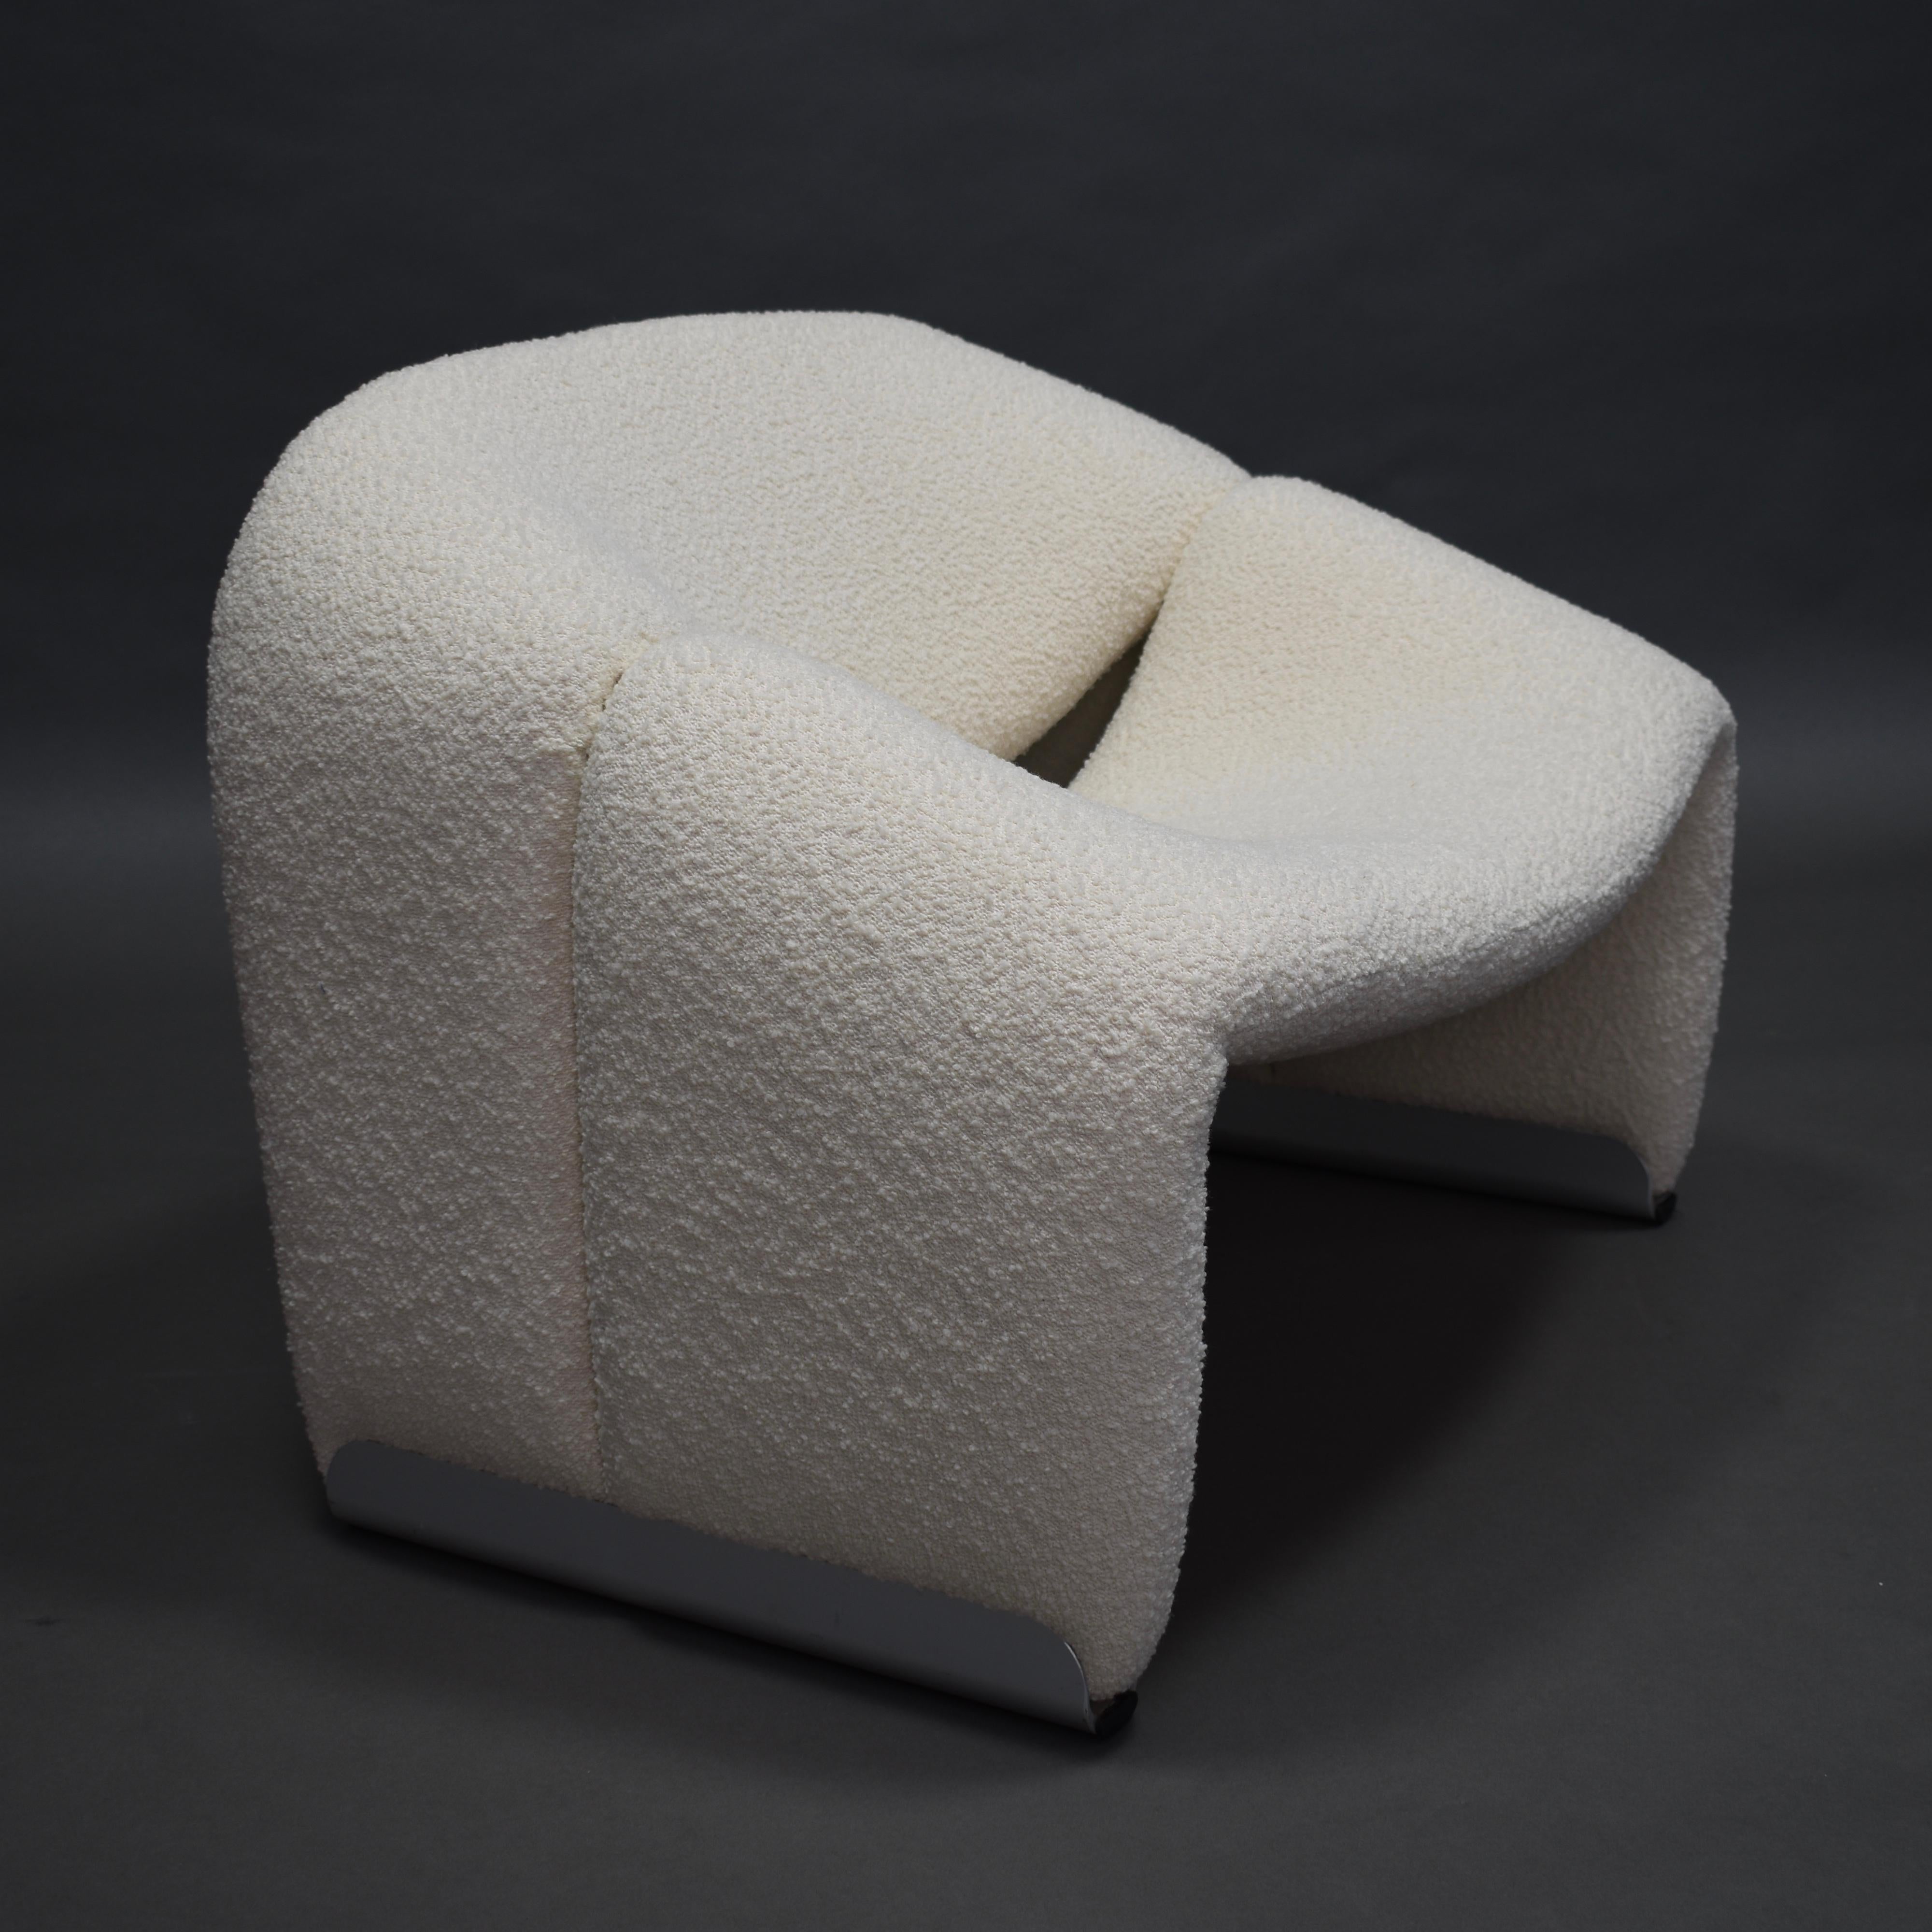 ‘Groovy’ F598 lounge chair by Pierre Paulin for Artifort, Netherlands, 1972.

The chair has been reupholstered in a beautiful off-white bouclé wool fabric by Bisson Bruneel (model Bergamo). The cold foam interior has also been changed.

2 chairs